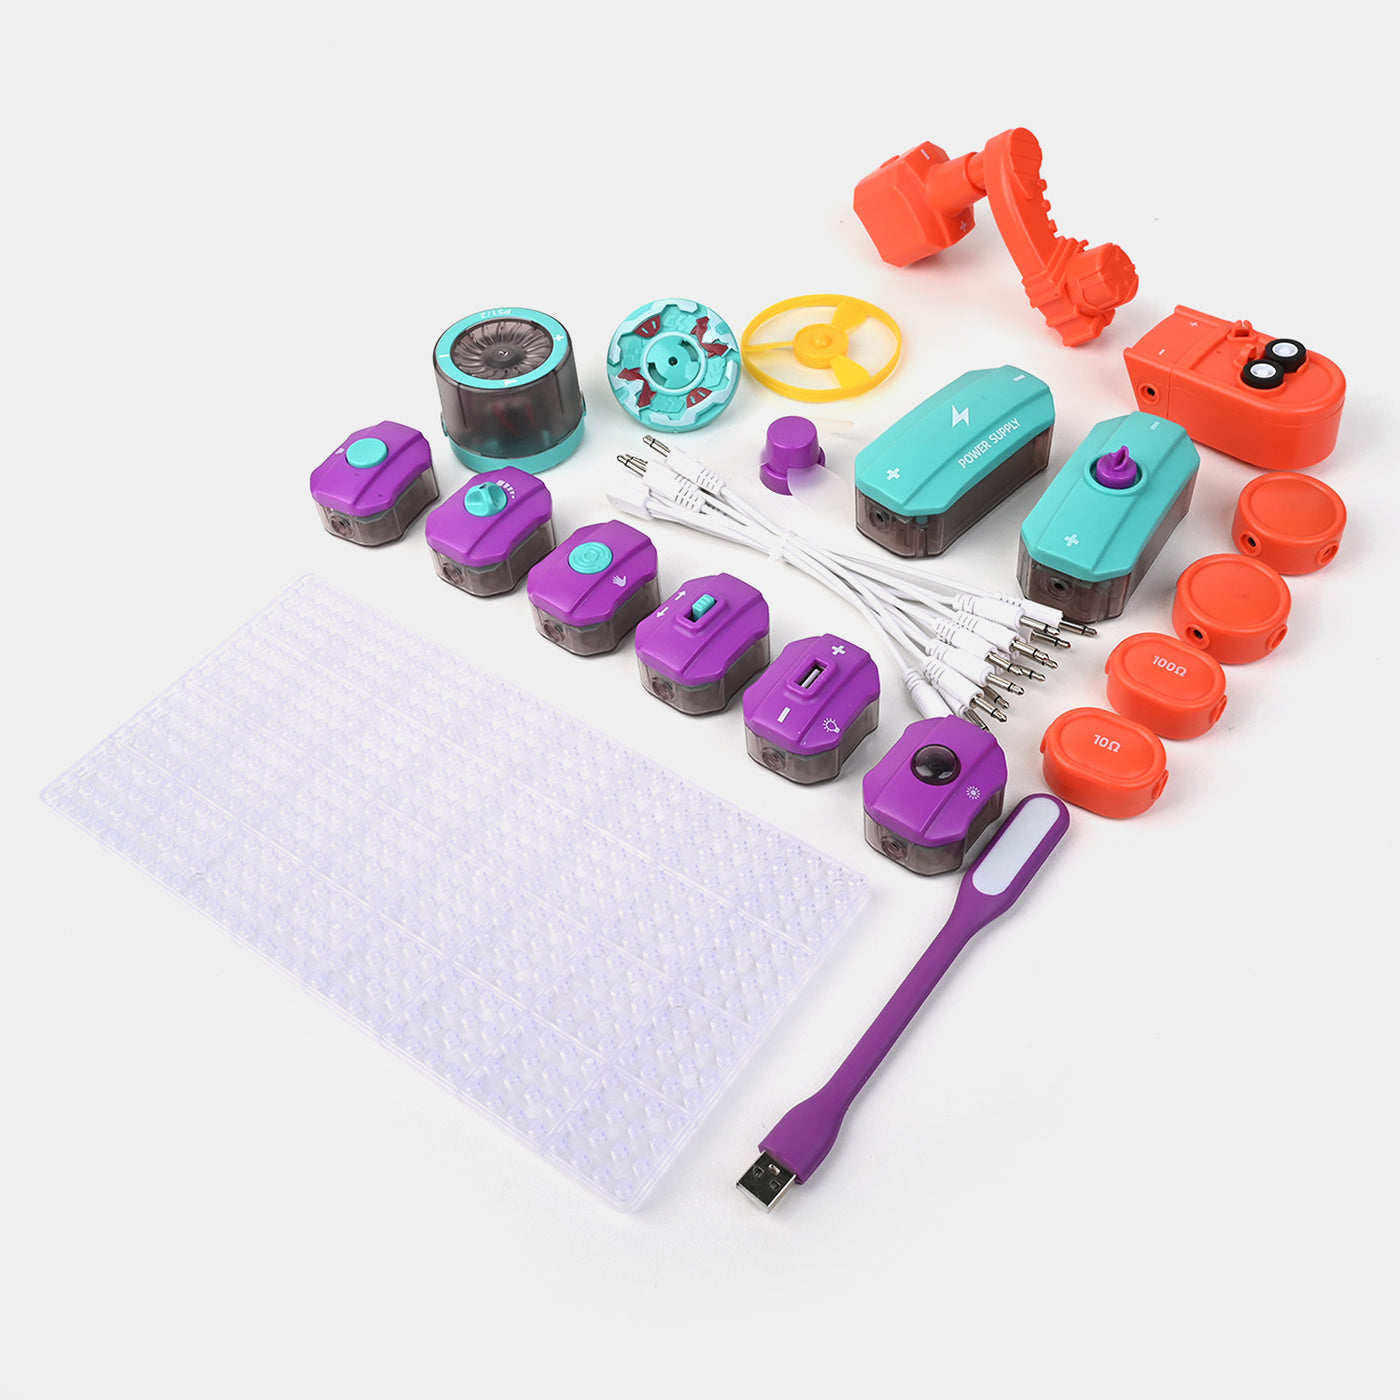 Electronic Science Building Blocks Game